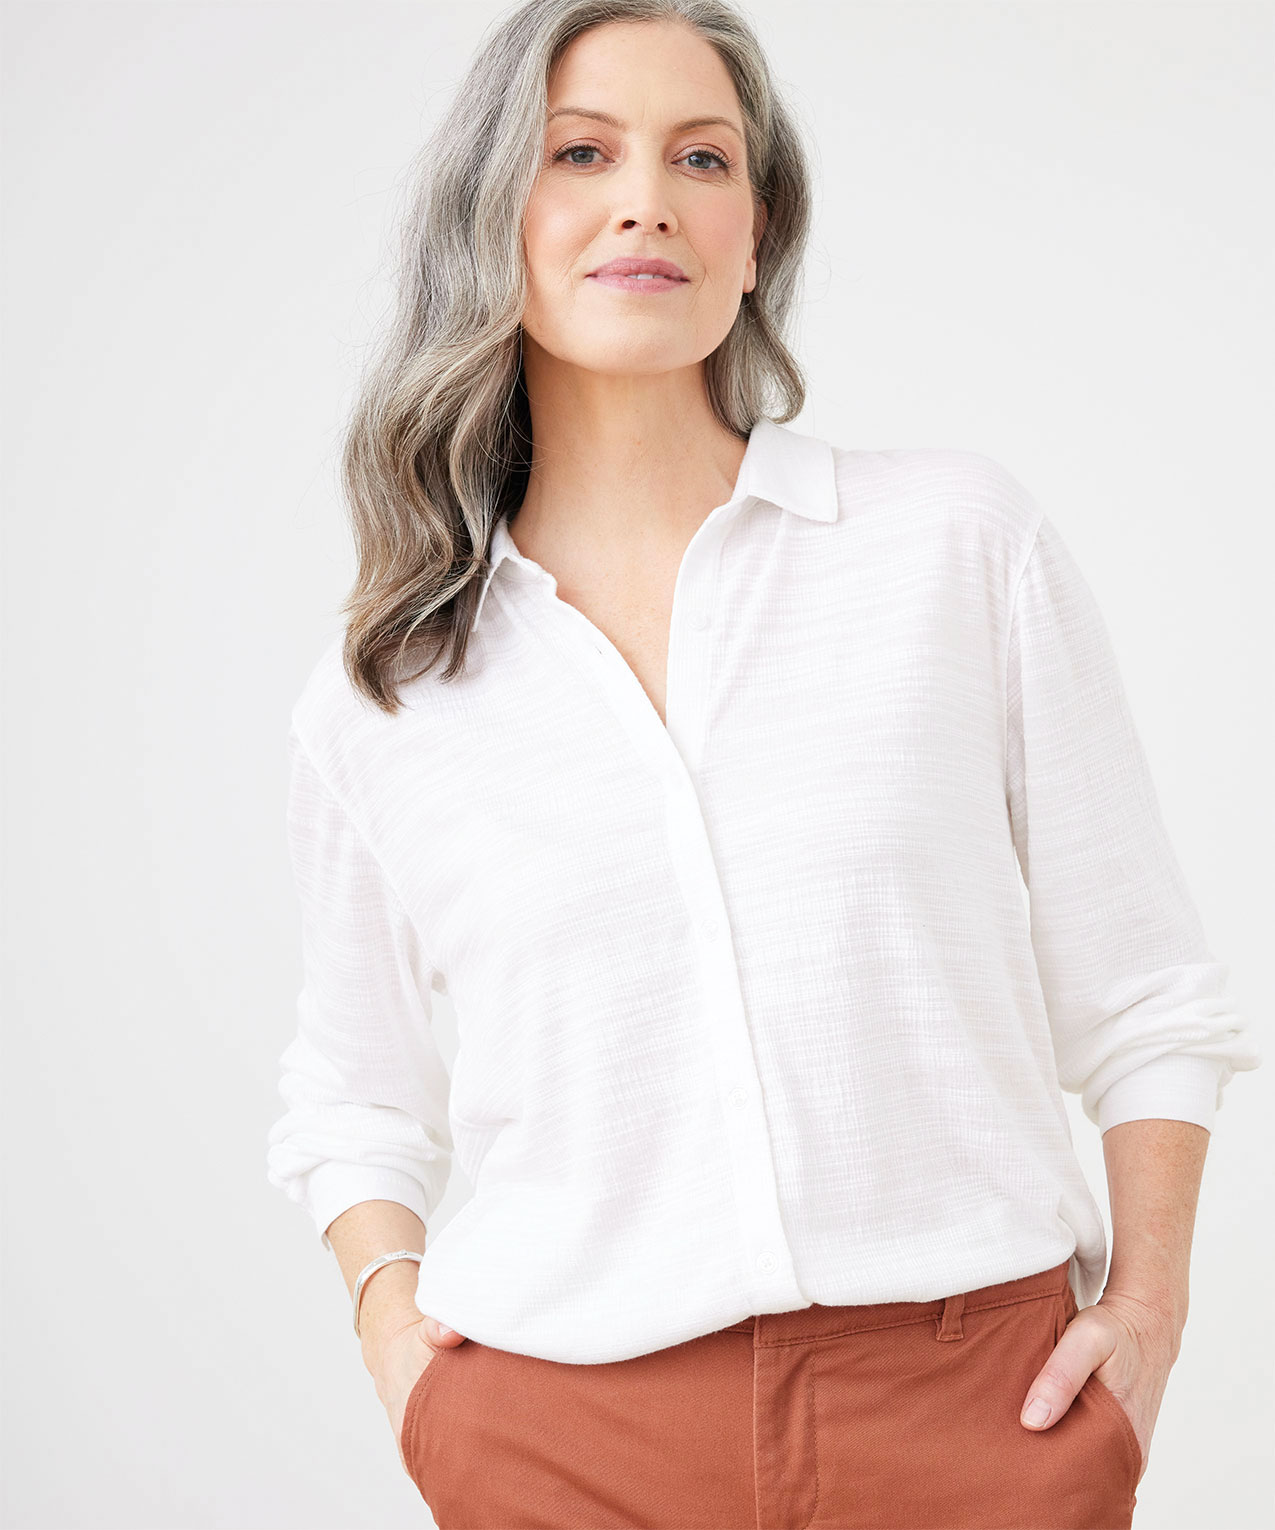 Tunic Shirt - White on White Check Women's Popover Blouse by Double R –  Double R Brand - Dallas